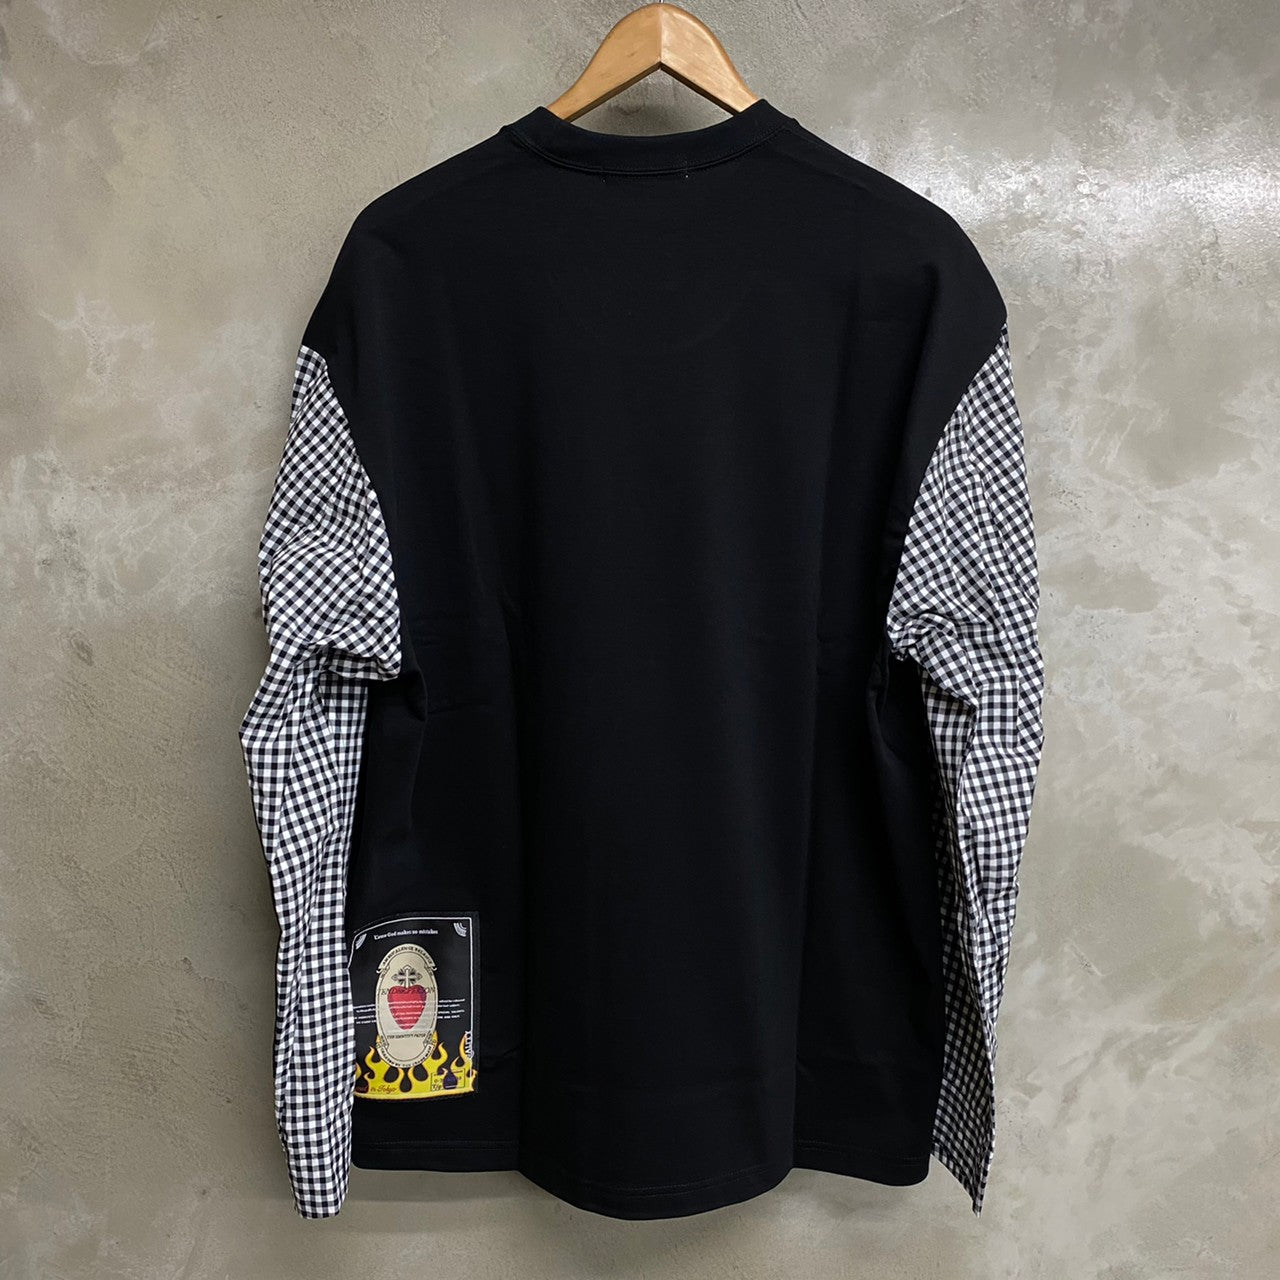 TENDER PERSON GINGHAM LONG SLEEVE T-SHIRTS / TENDER PERSON